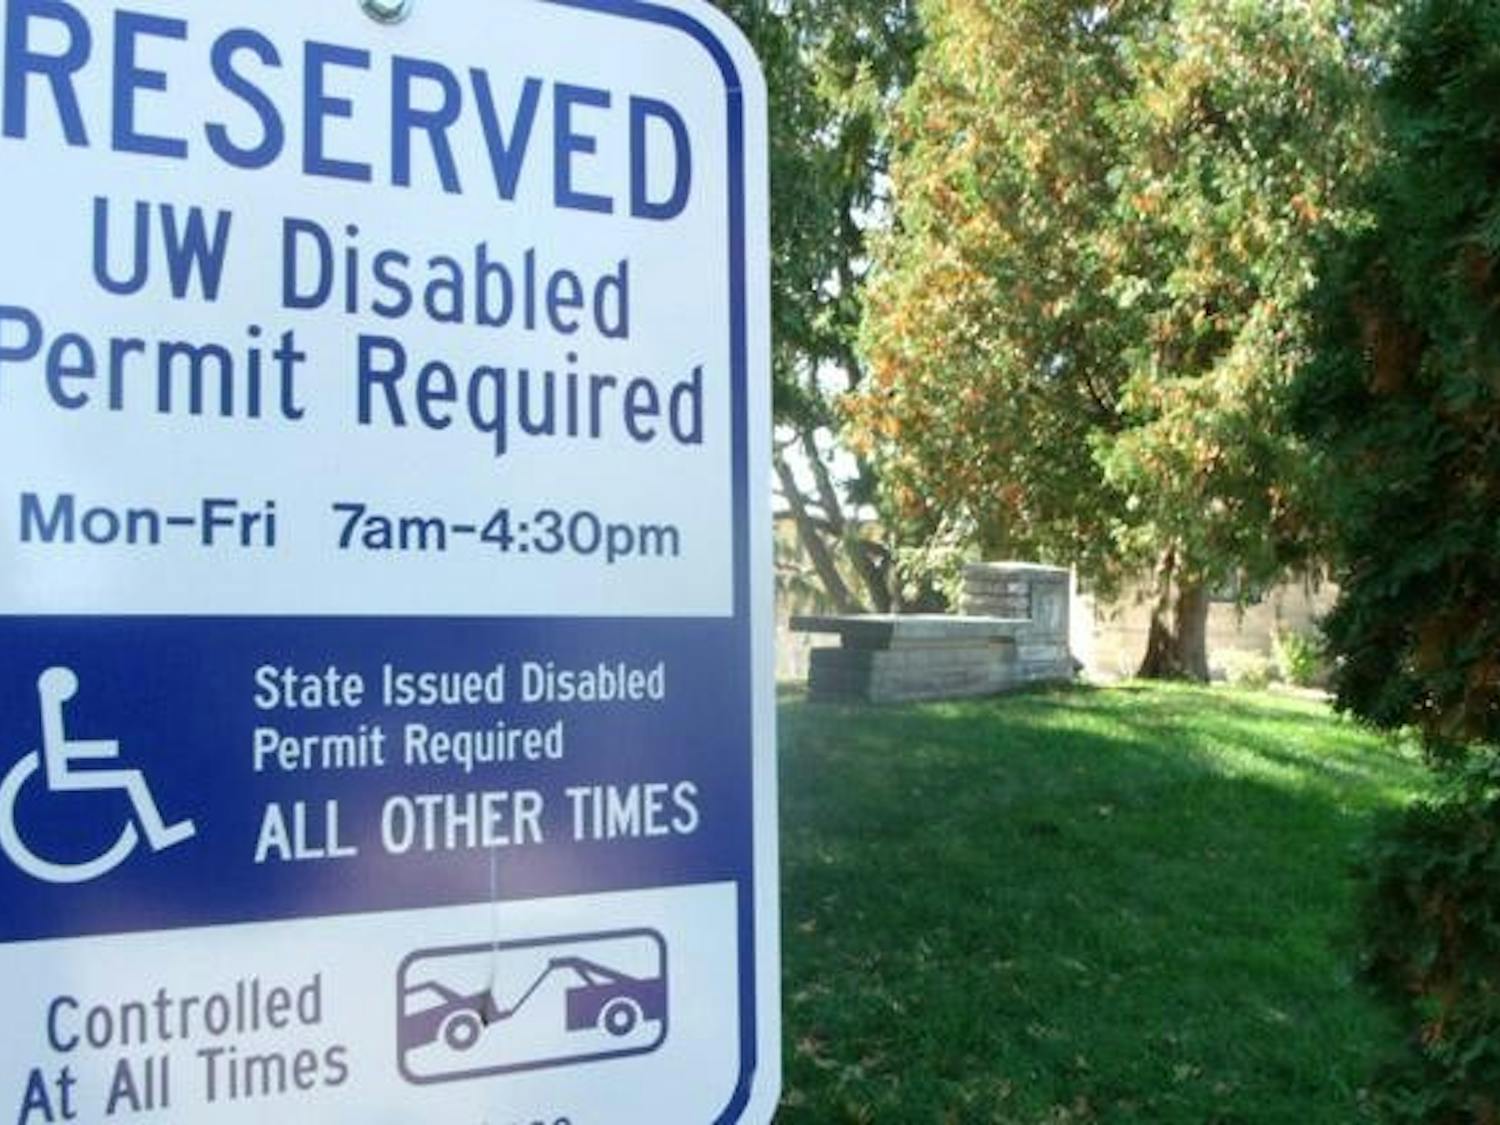 Disabled at UW